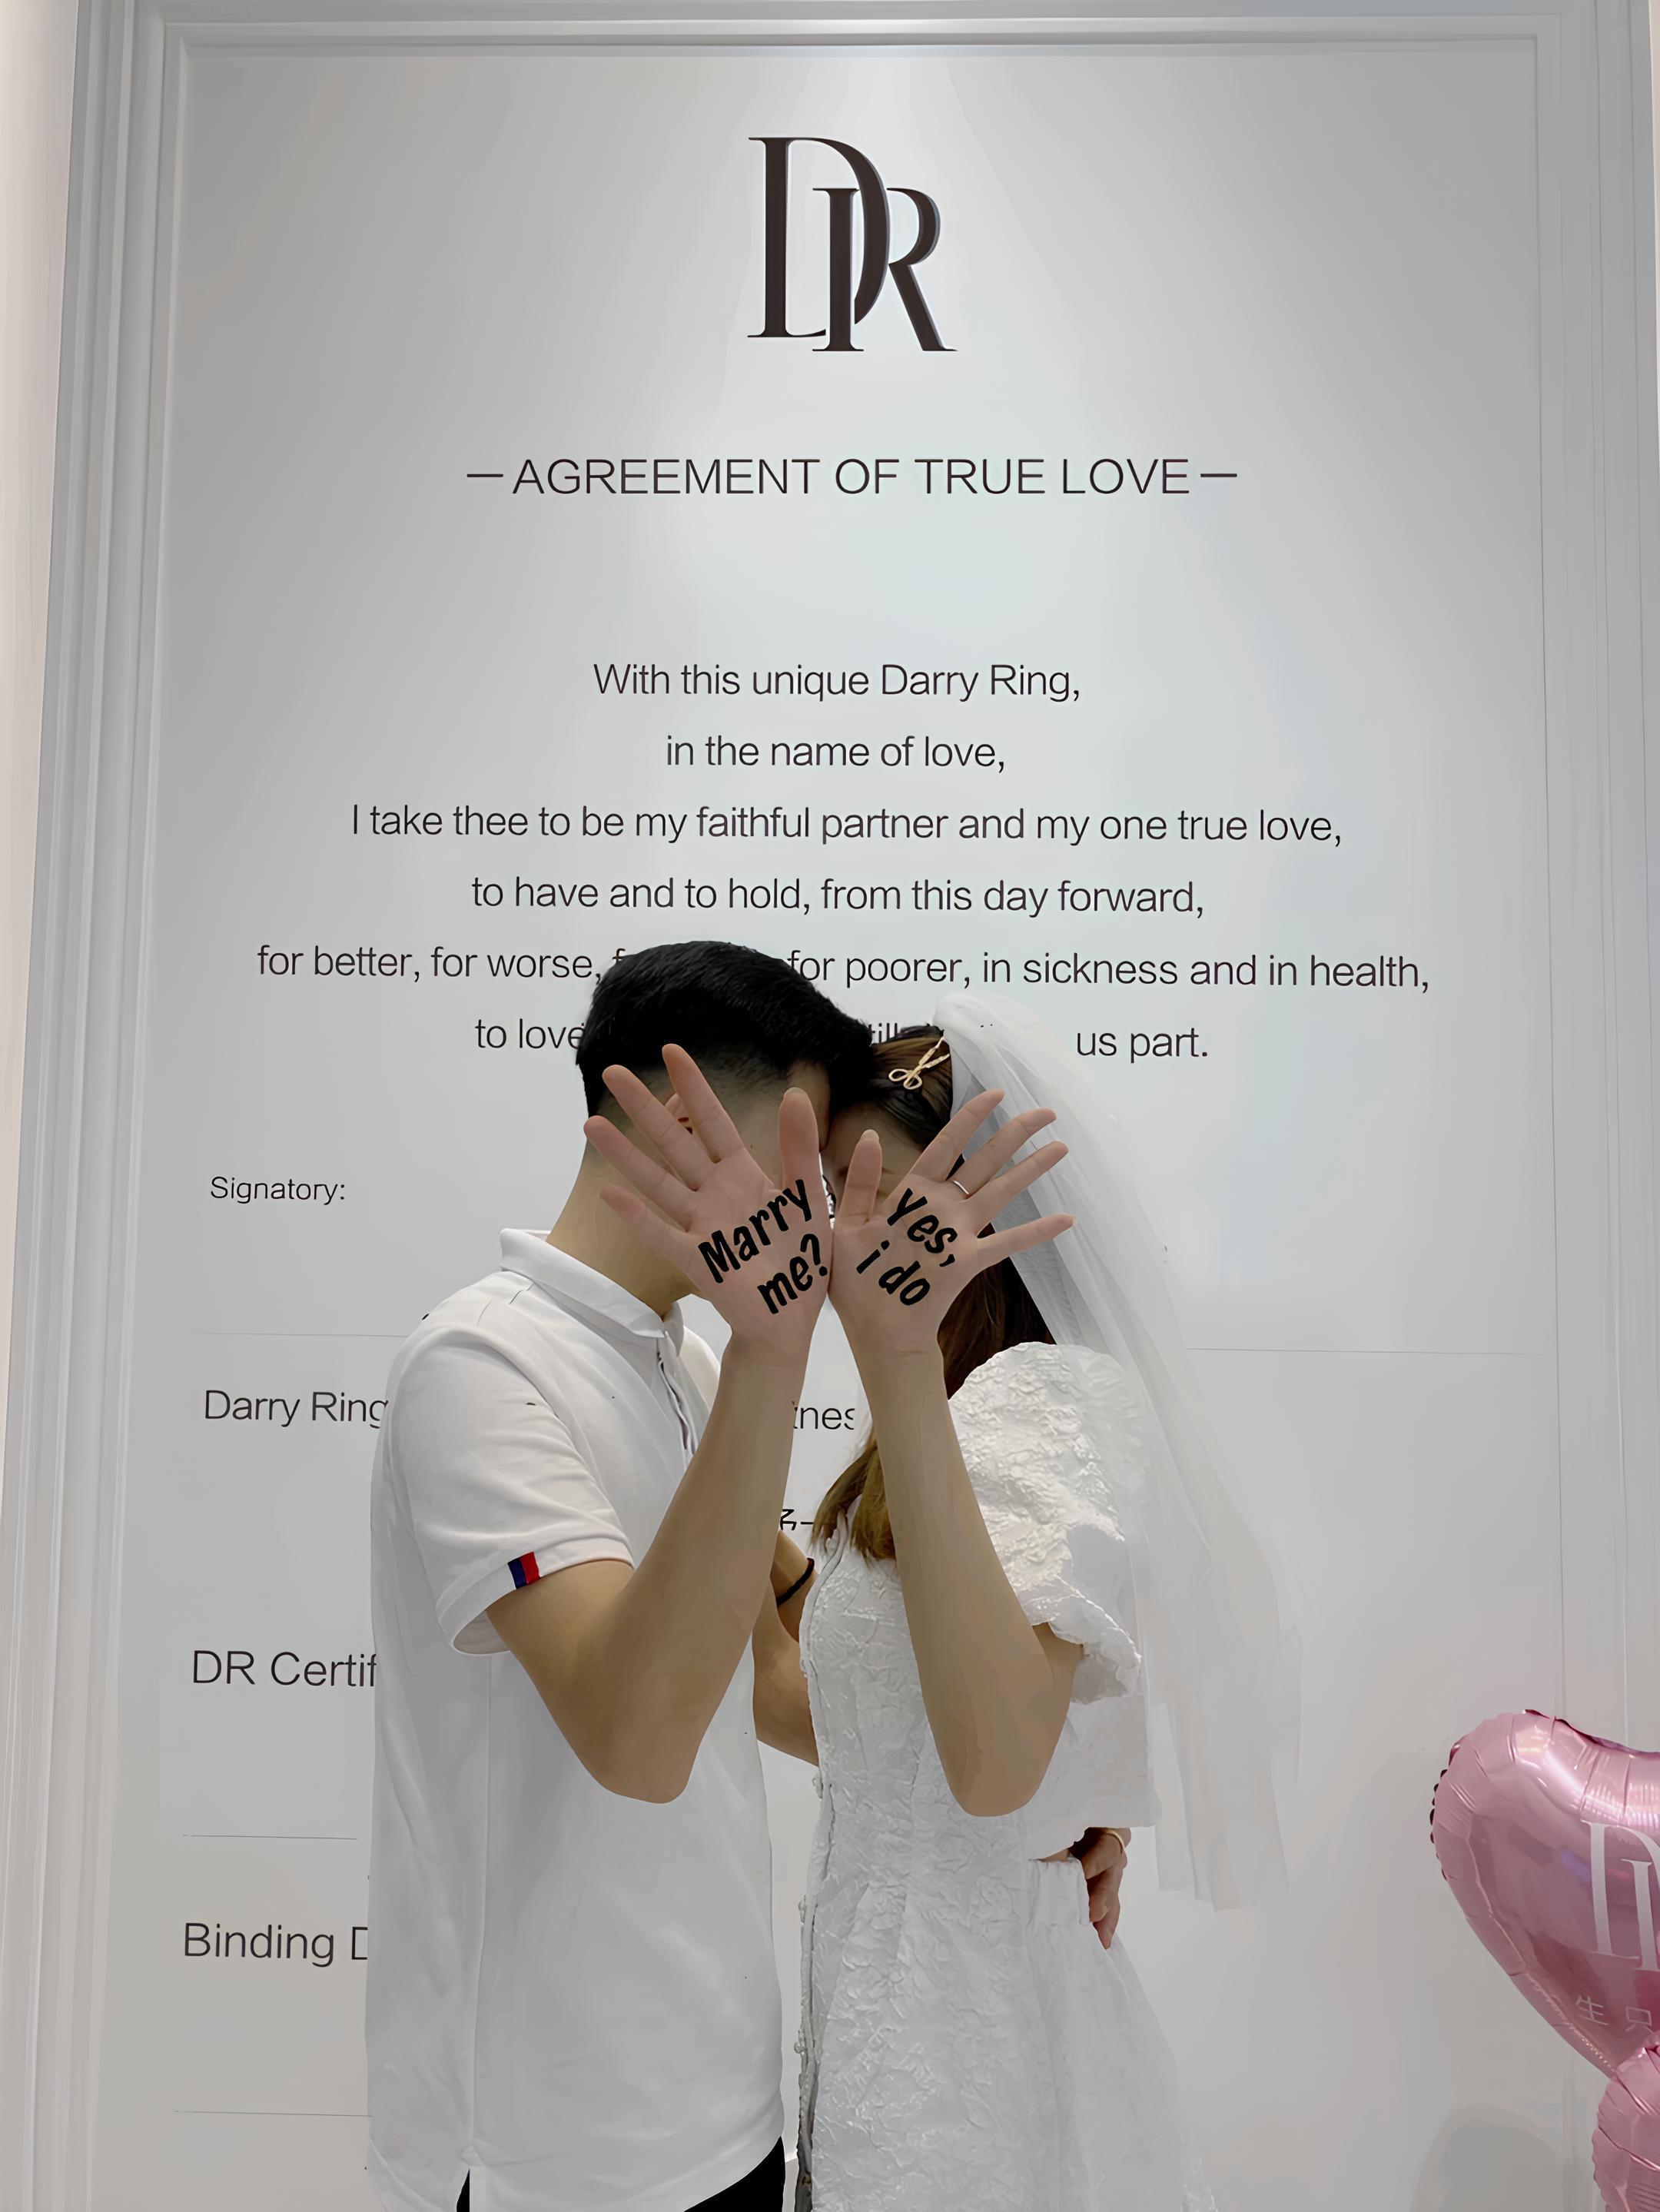 Darry Ring True Love Agreement Wall